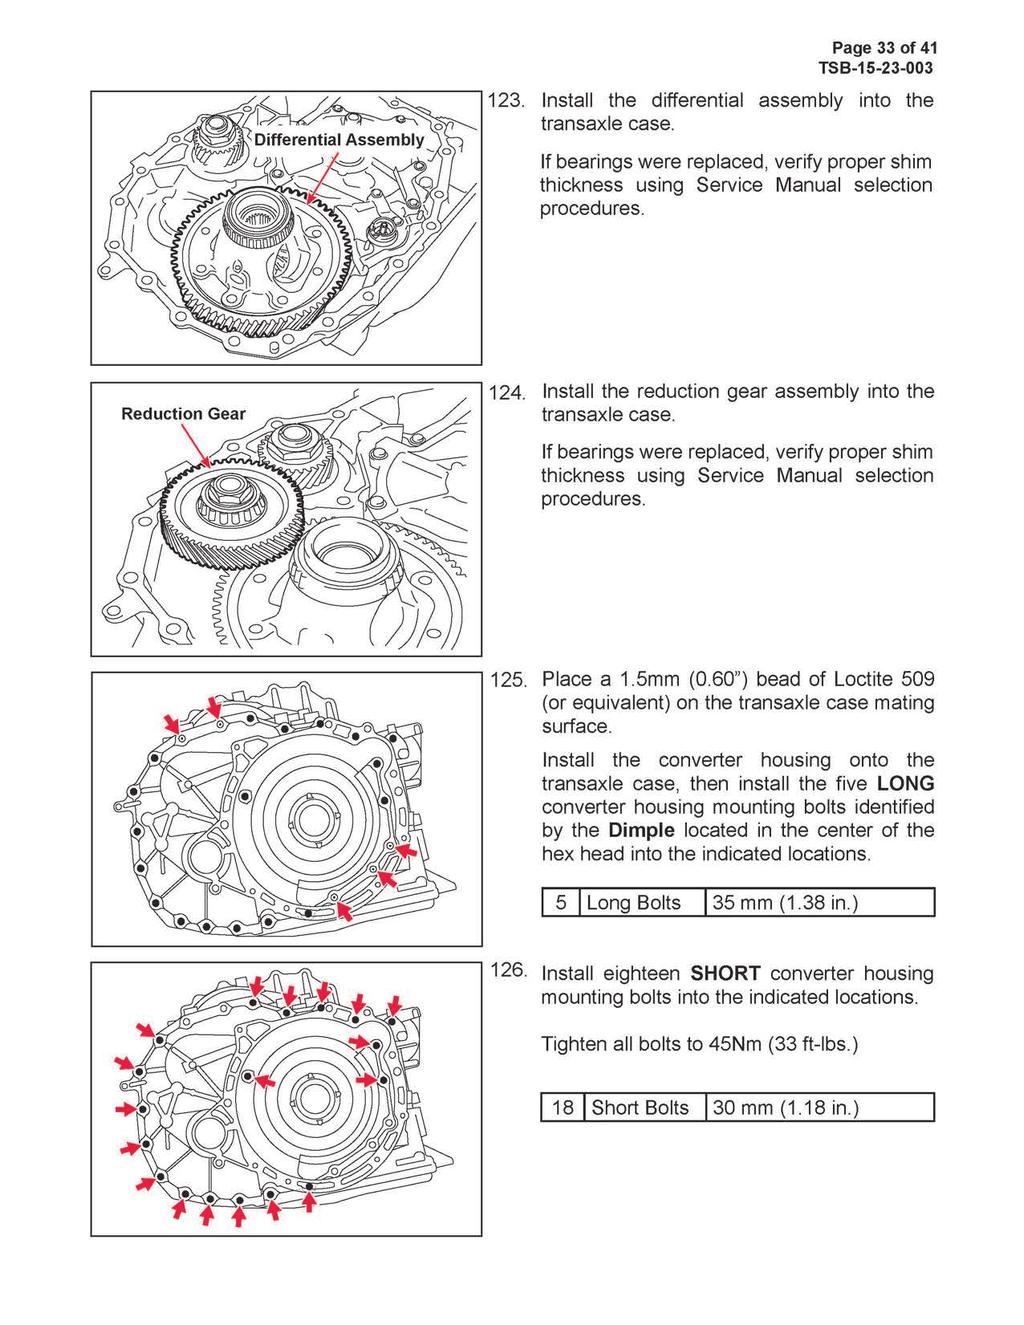 Page 33 of 41 123. Install the differential assembly into the transaxle case. If bearings were replaced, verify proper shim thickness using Service Manual selection procedures. 124.